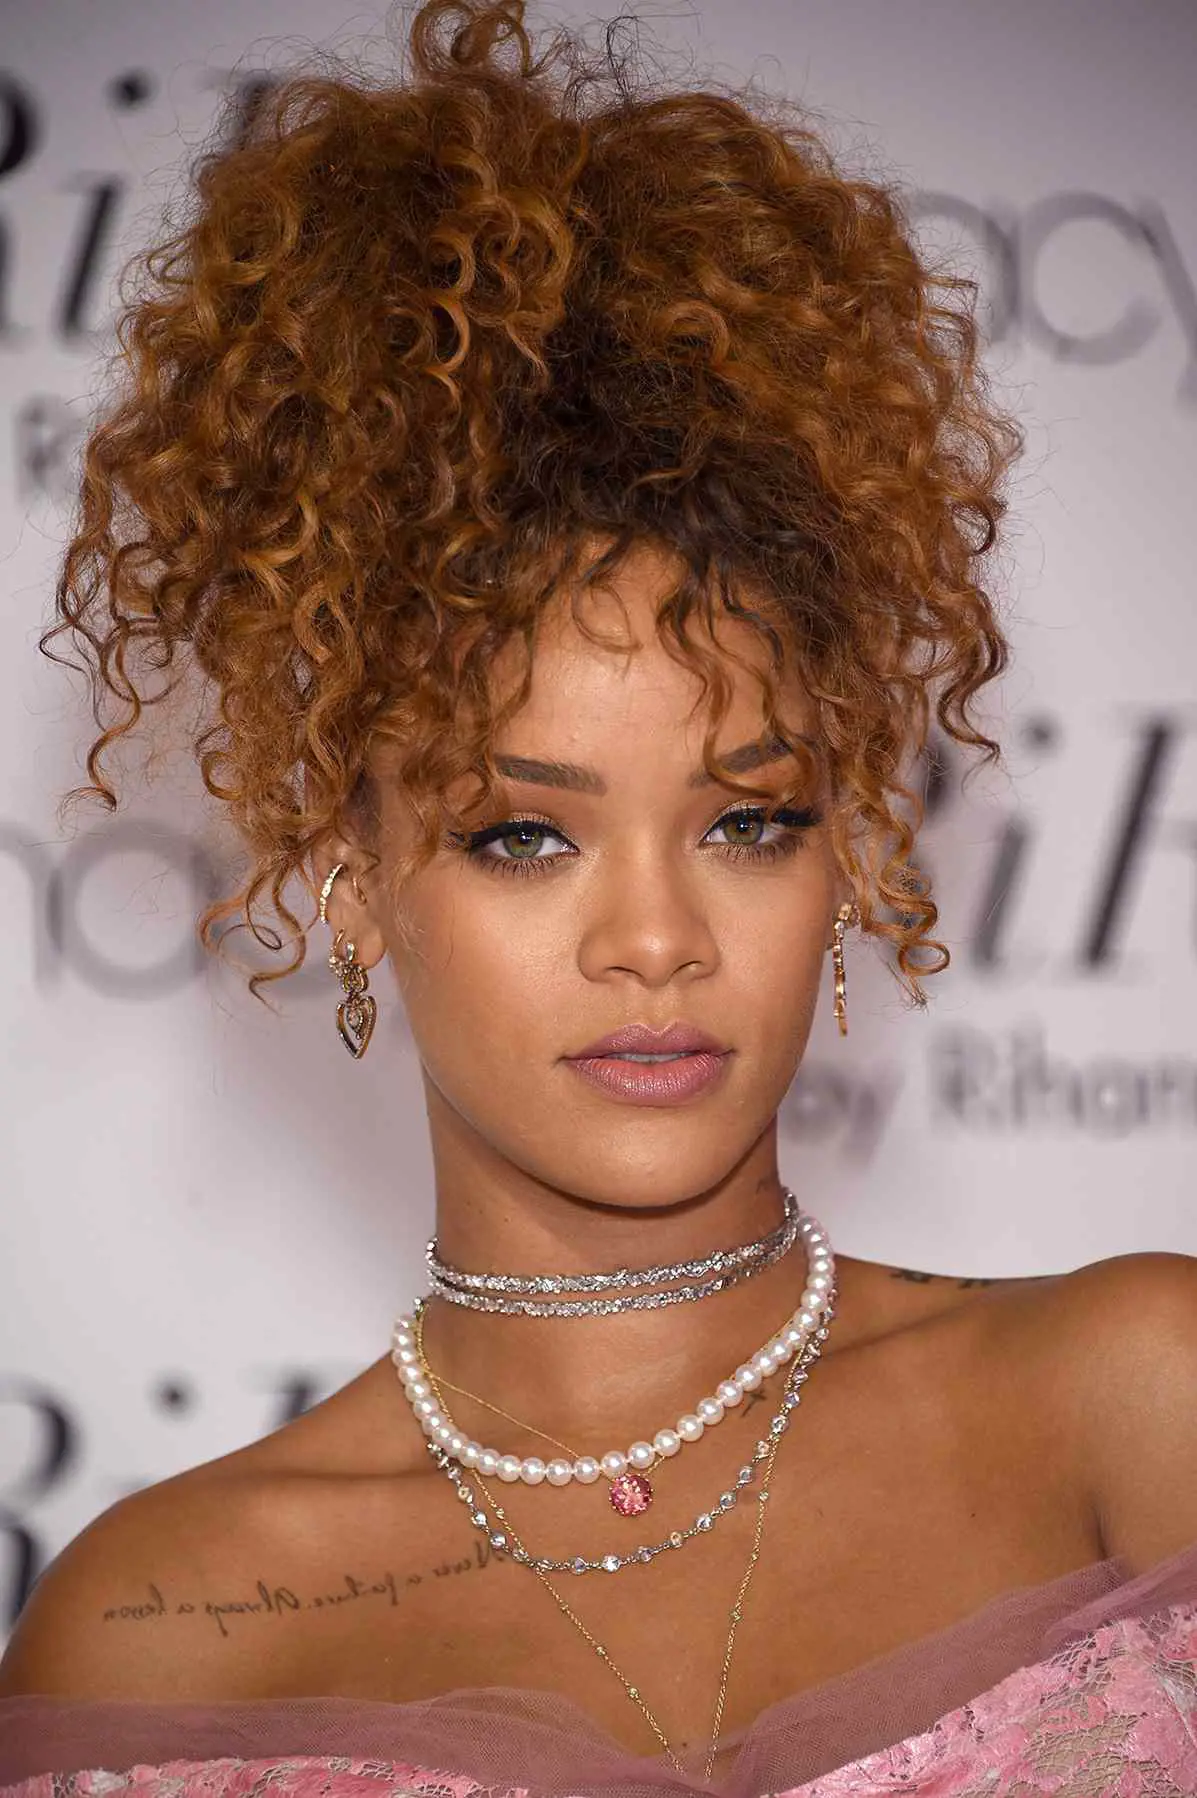 Rihanna made the Pineapple hairstyle famous after wearing it to the launch of her perfume, Riri